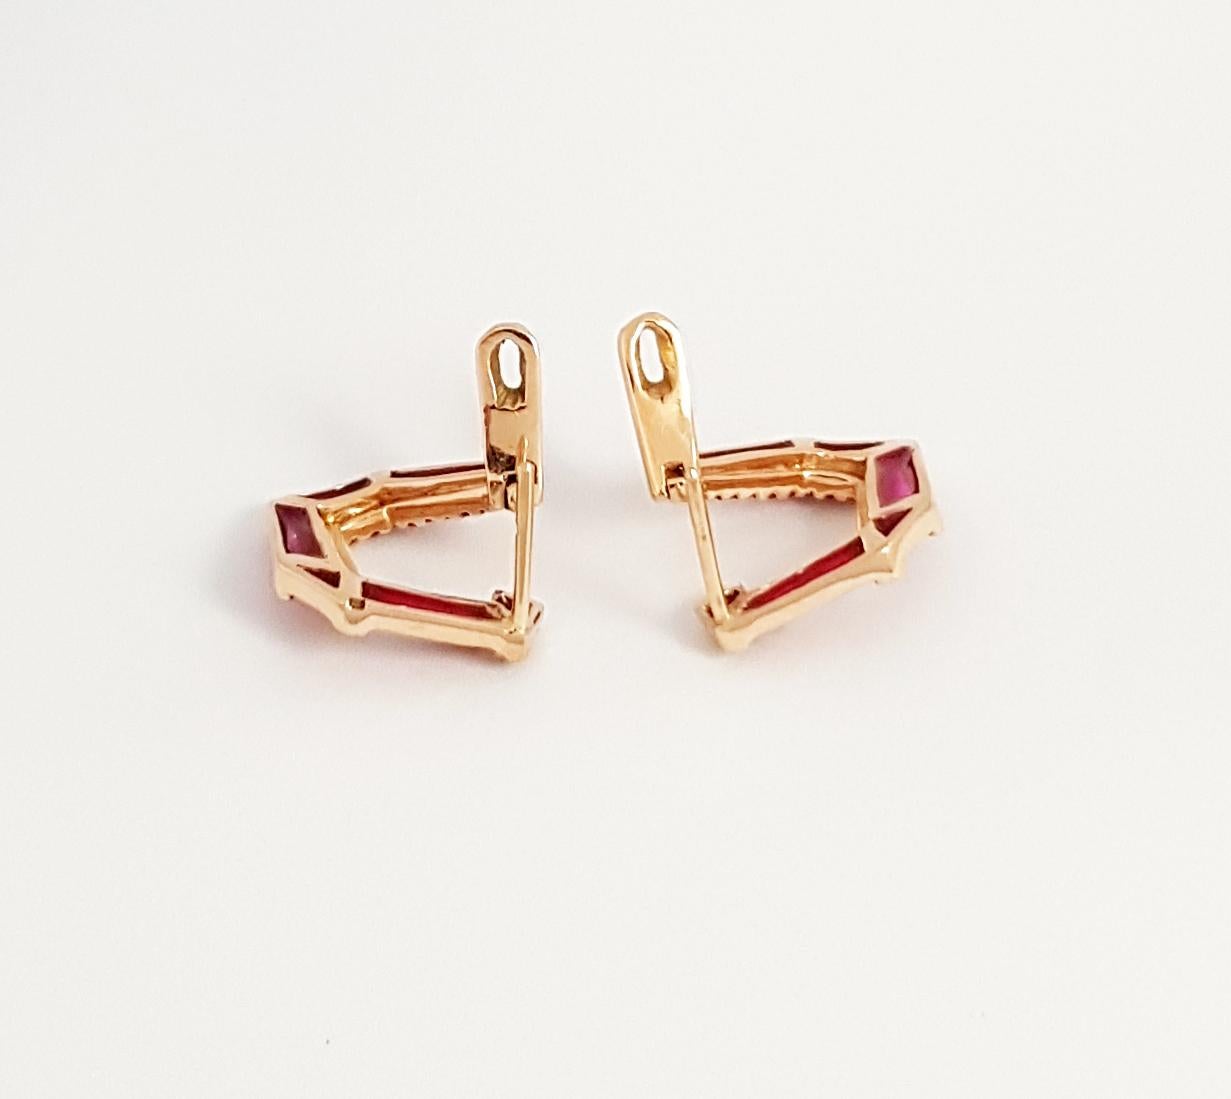 Origami Link No. 5 Ruby with Enamel Earrings 18K Rose Gold Petite For Sale 1